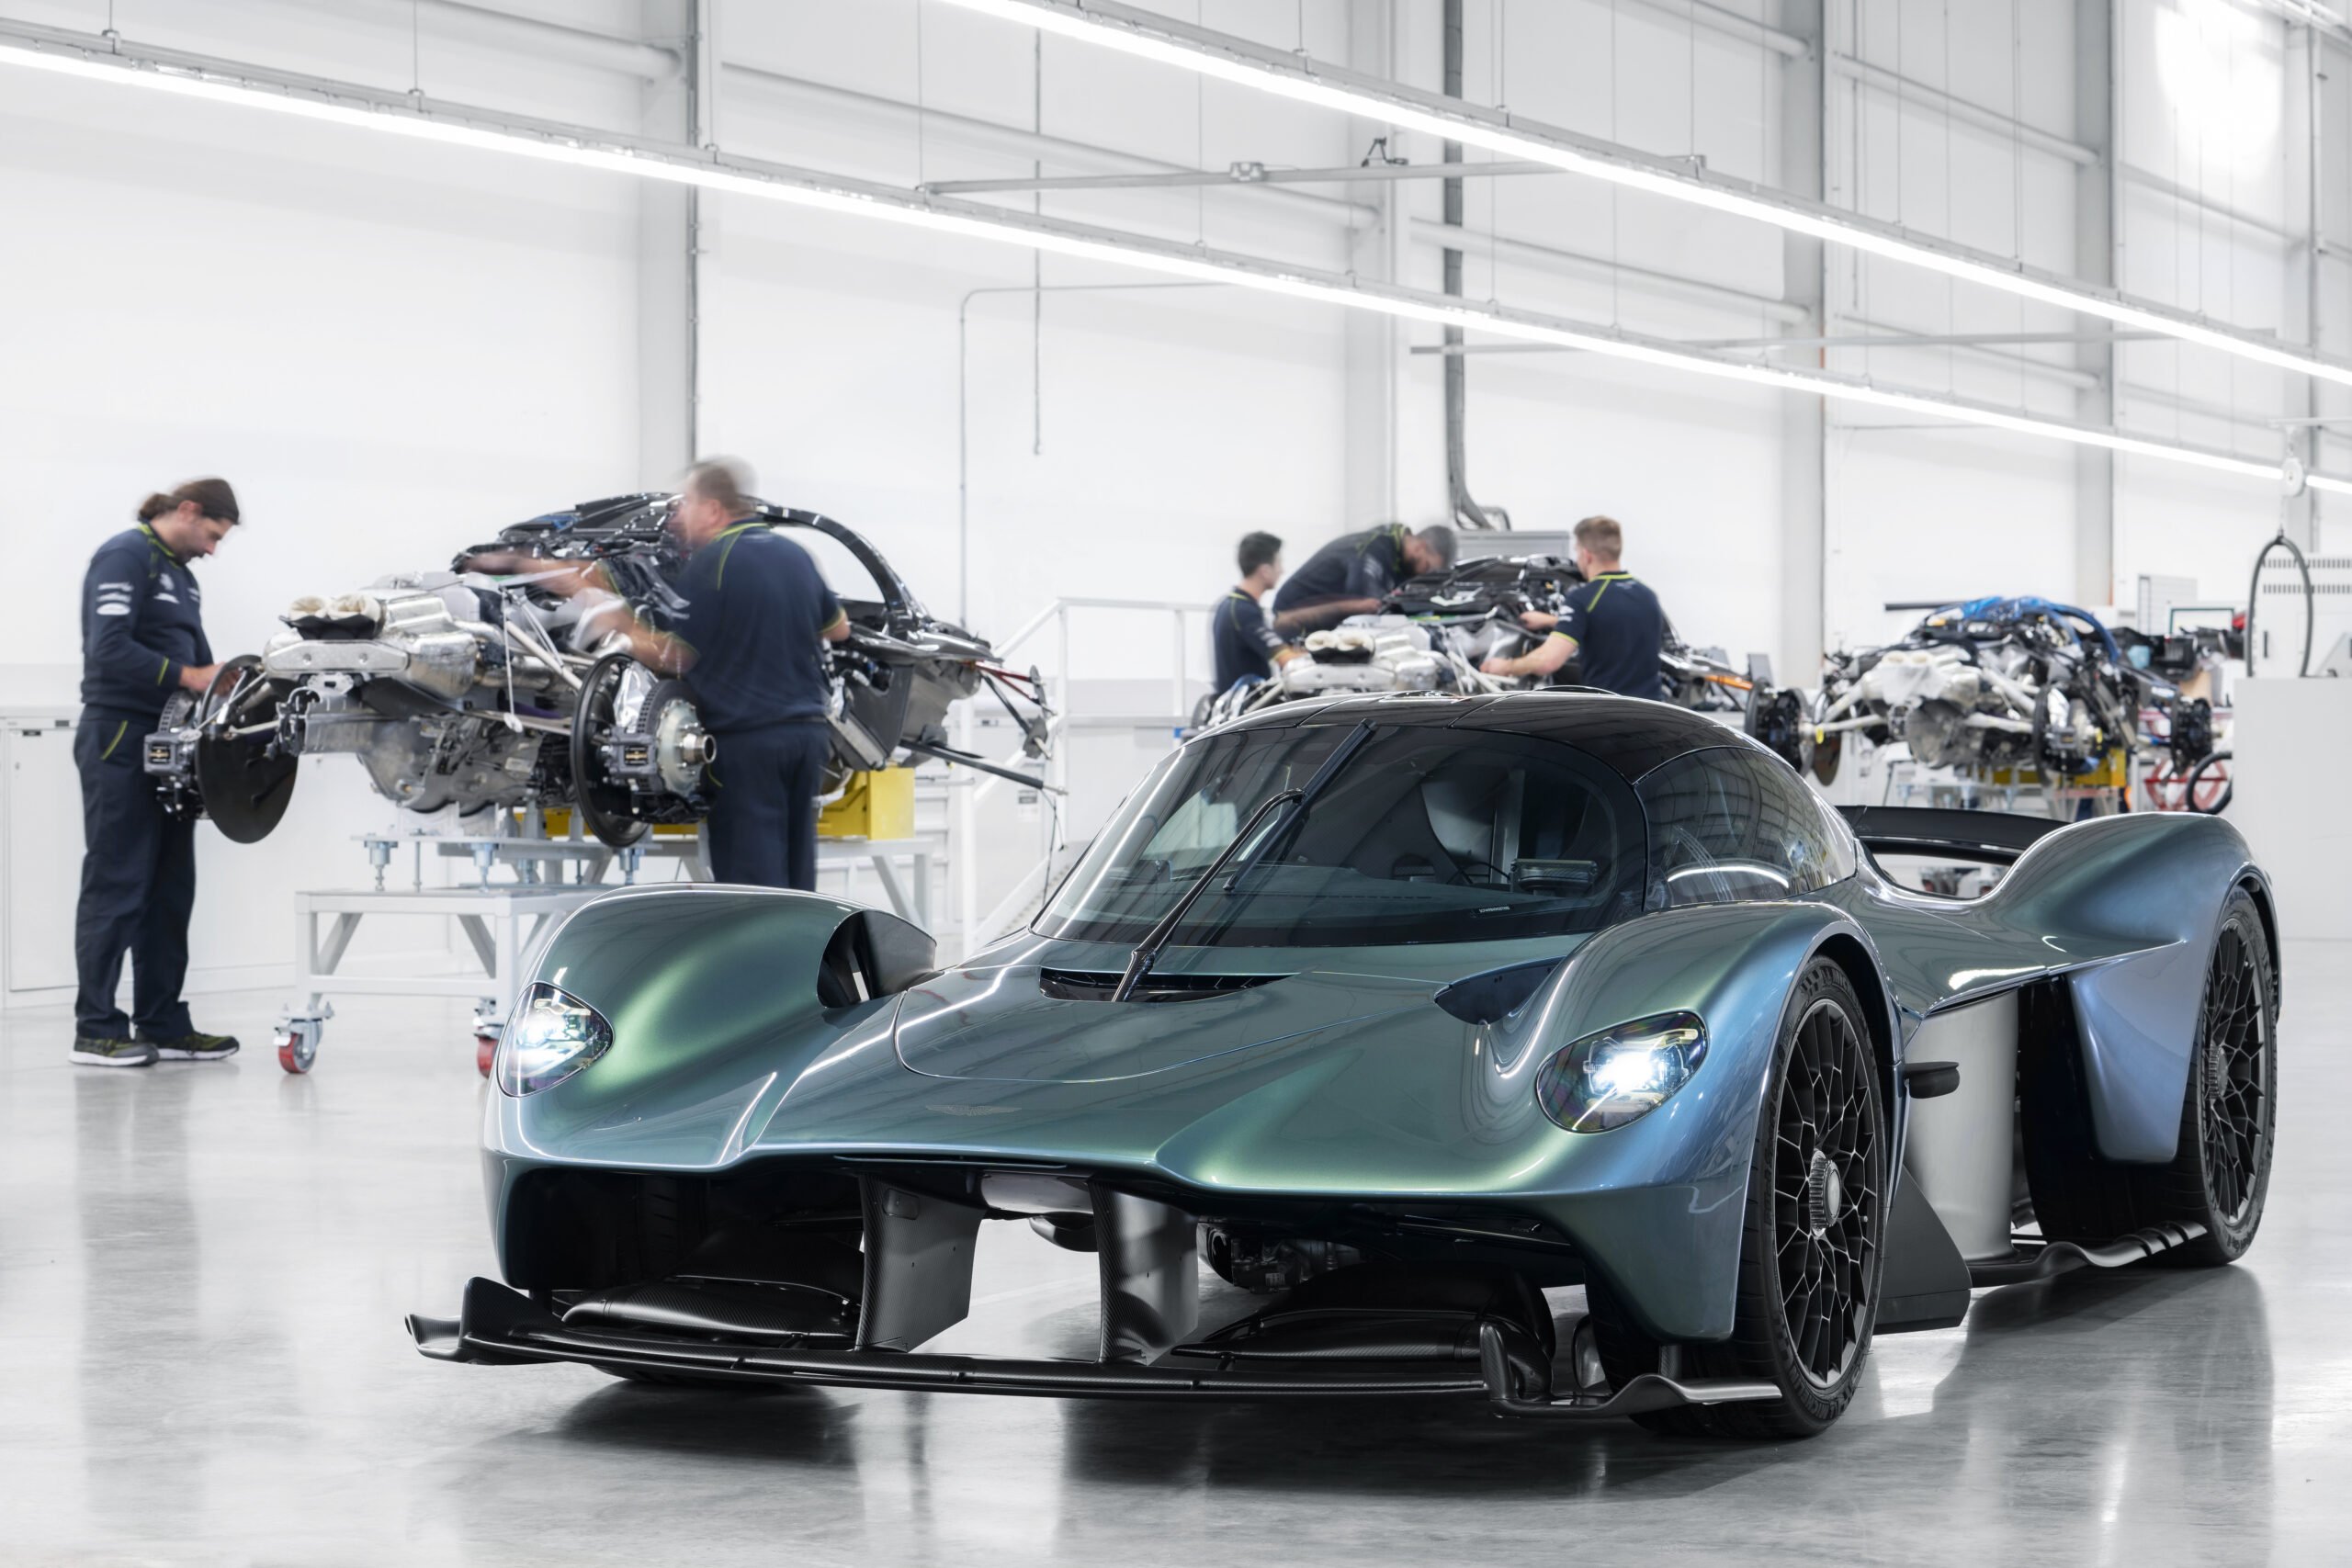 Aston Martin Valkyrie ready for customers